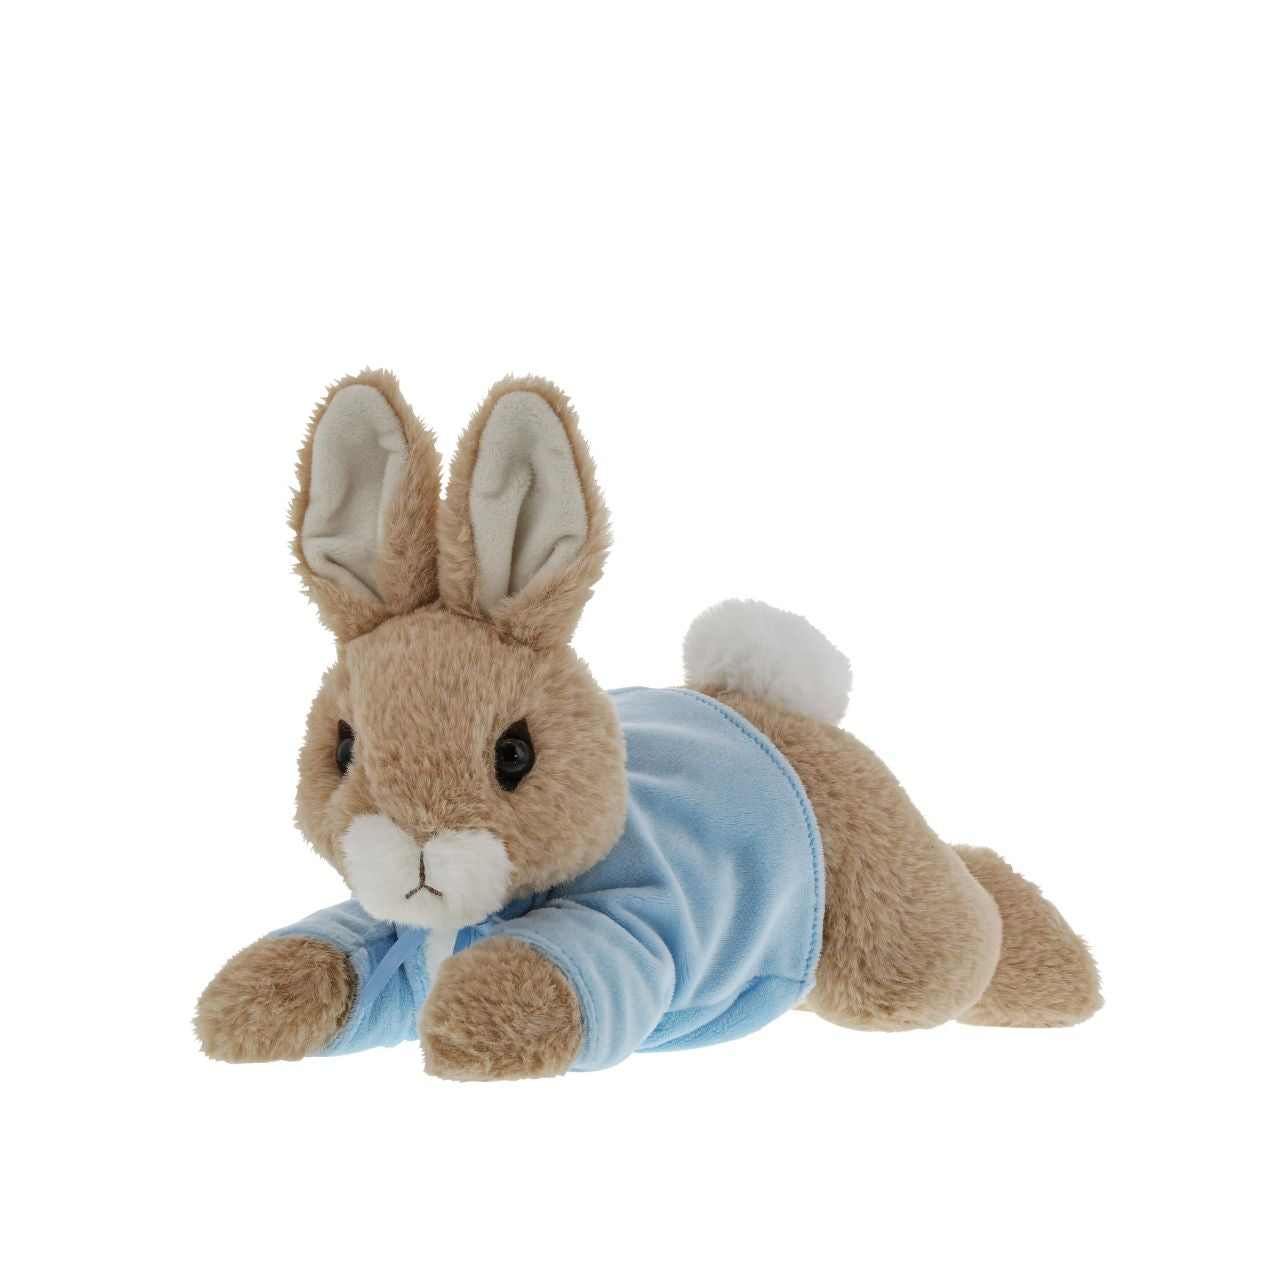 This Peter Rabbit soft toy is made from beautifully soft fabric and is dressed in clothing exactly as illustrated by Beatrix Potter, with his signature blue jacket and a new dynamic pose. The Peter Rabbit collection features the much loved characters from the Beatrix Potter books and this quality and authentic soft toy is sure to be adored for many years to come.